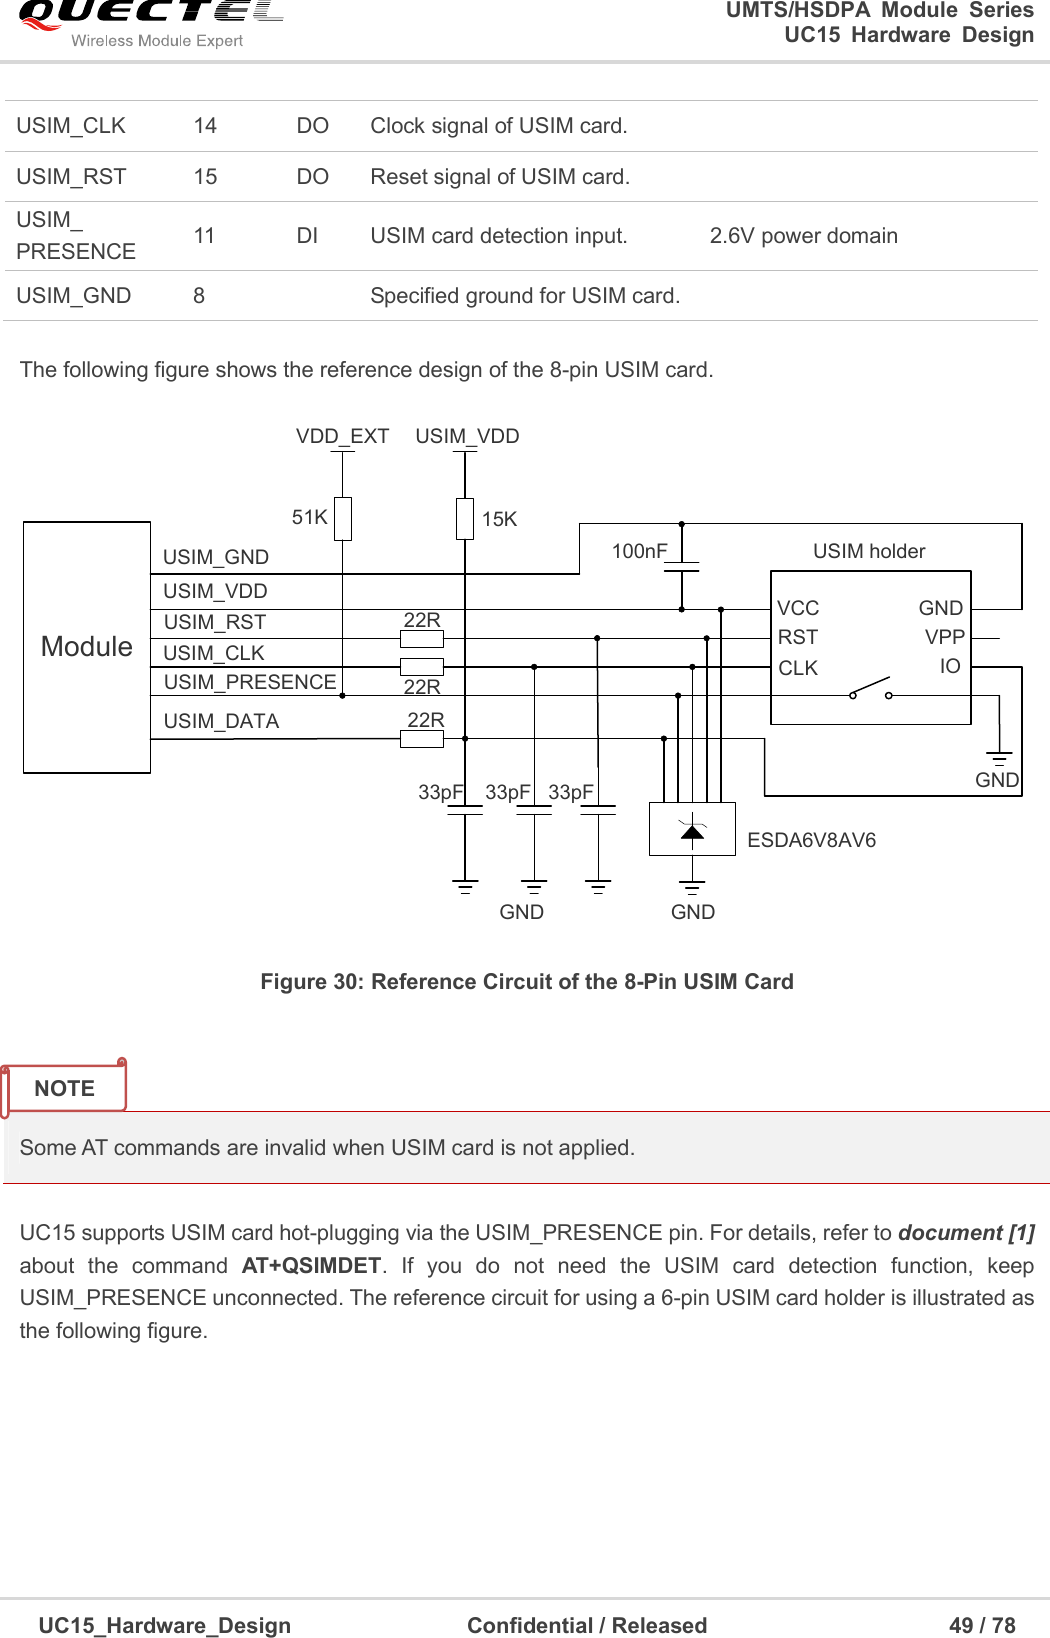                                                                        UMTS/HSDPA  Module  Series                                                                 UC15 Hardware Design  UC15_Hardware_Design                                Confidential / Released                                            49 / 78     The following figure shows the reference design of the 8-pin USIM card. ModuleUSIM_VDDUSIM_GNDUSIM_RSTUSIM_CLKUSIM_DATAUSIM_PRESENCE22R22R22RVDD_EXT51K100nF USIM holderGNDGNDESDA6V8AV633pF 33pF 33pFVCCRSTCLK IOVPPGNDGNDUSIM_VDD15K Figure 30: Reference Circuit of the 8-Pin USIM Card   Some AT commands are invalid when USIM card is not applied.  UC15 supports USIM card hot-plugging via the USIM_PRESENCE pin. For details, refer to document [1] about  the  command  AT+QSIMDET.  If  you  do  not  need  the  USIM  card  detection  function,  keep USIM_PRESENCE unconnected. The reference circuit for using a 6-pin USIM card holder is illustrated as the following figure. USIM_CLK  14  DO  Clock signal of USIM card.   USIM_RST  15  DO  Reset signal of USIM card.   USIM_ PRESENCE  11  DI  USIM card detection input.  2.6V power domain USIM_GND  8    Specified ground for USIM card.  NOTE 